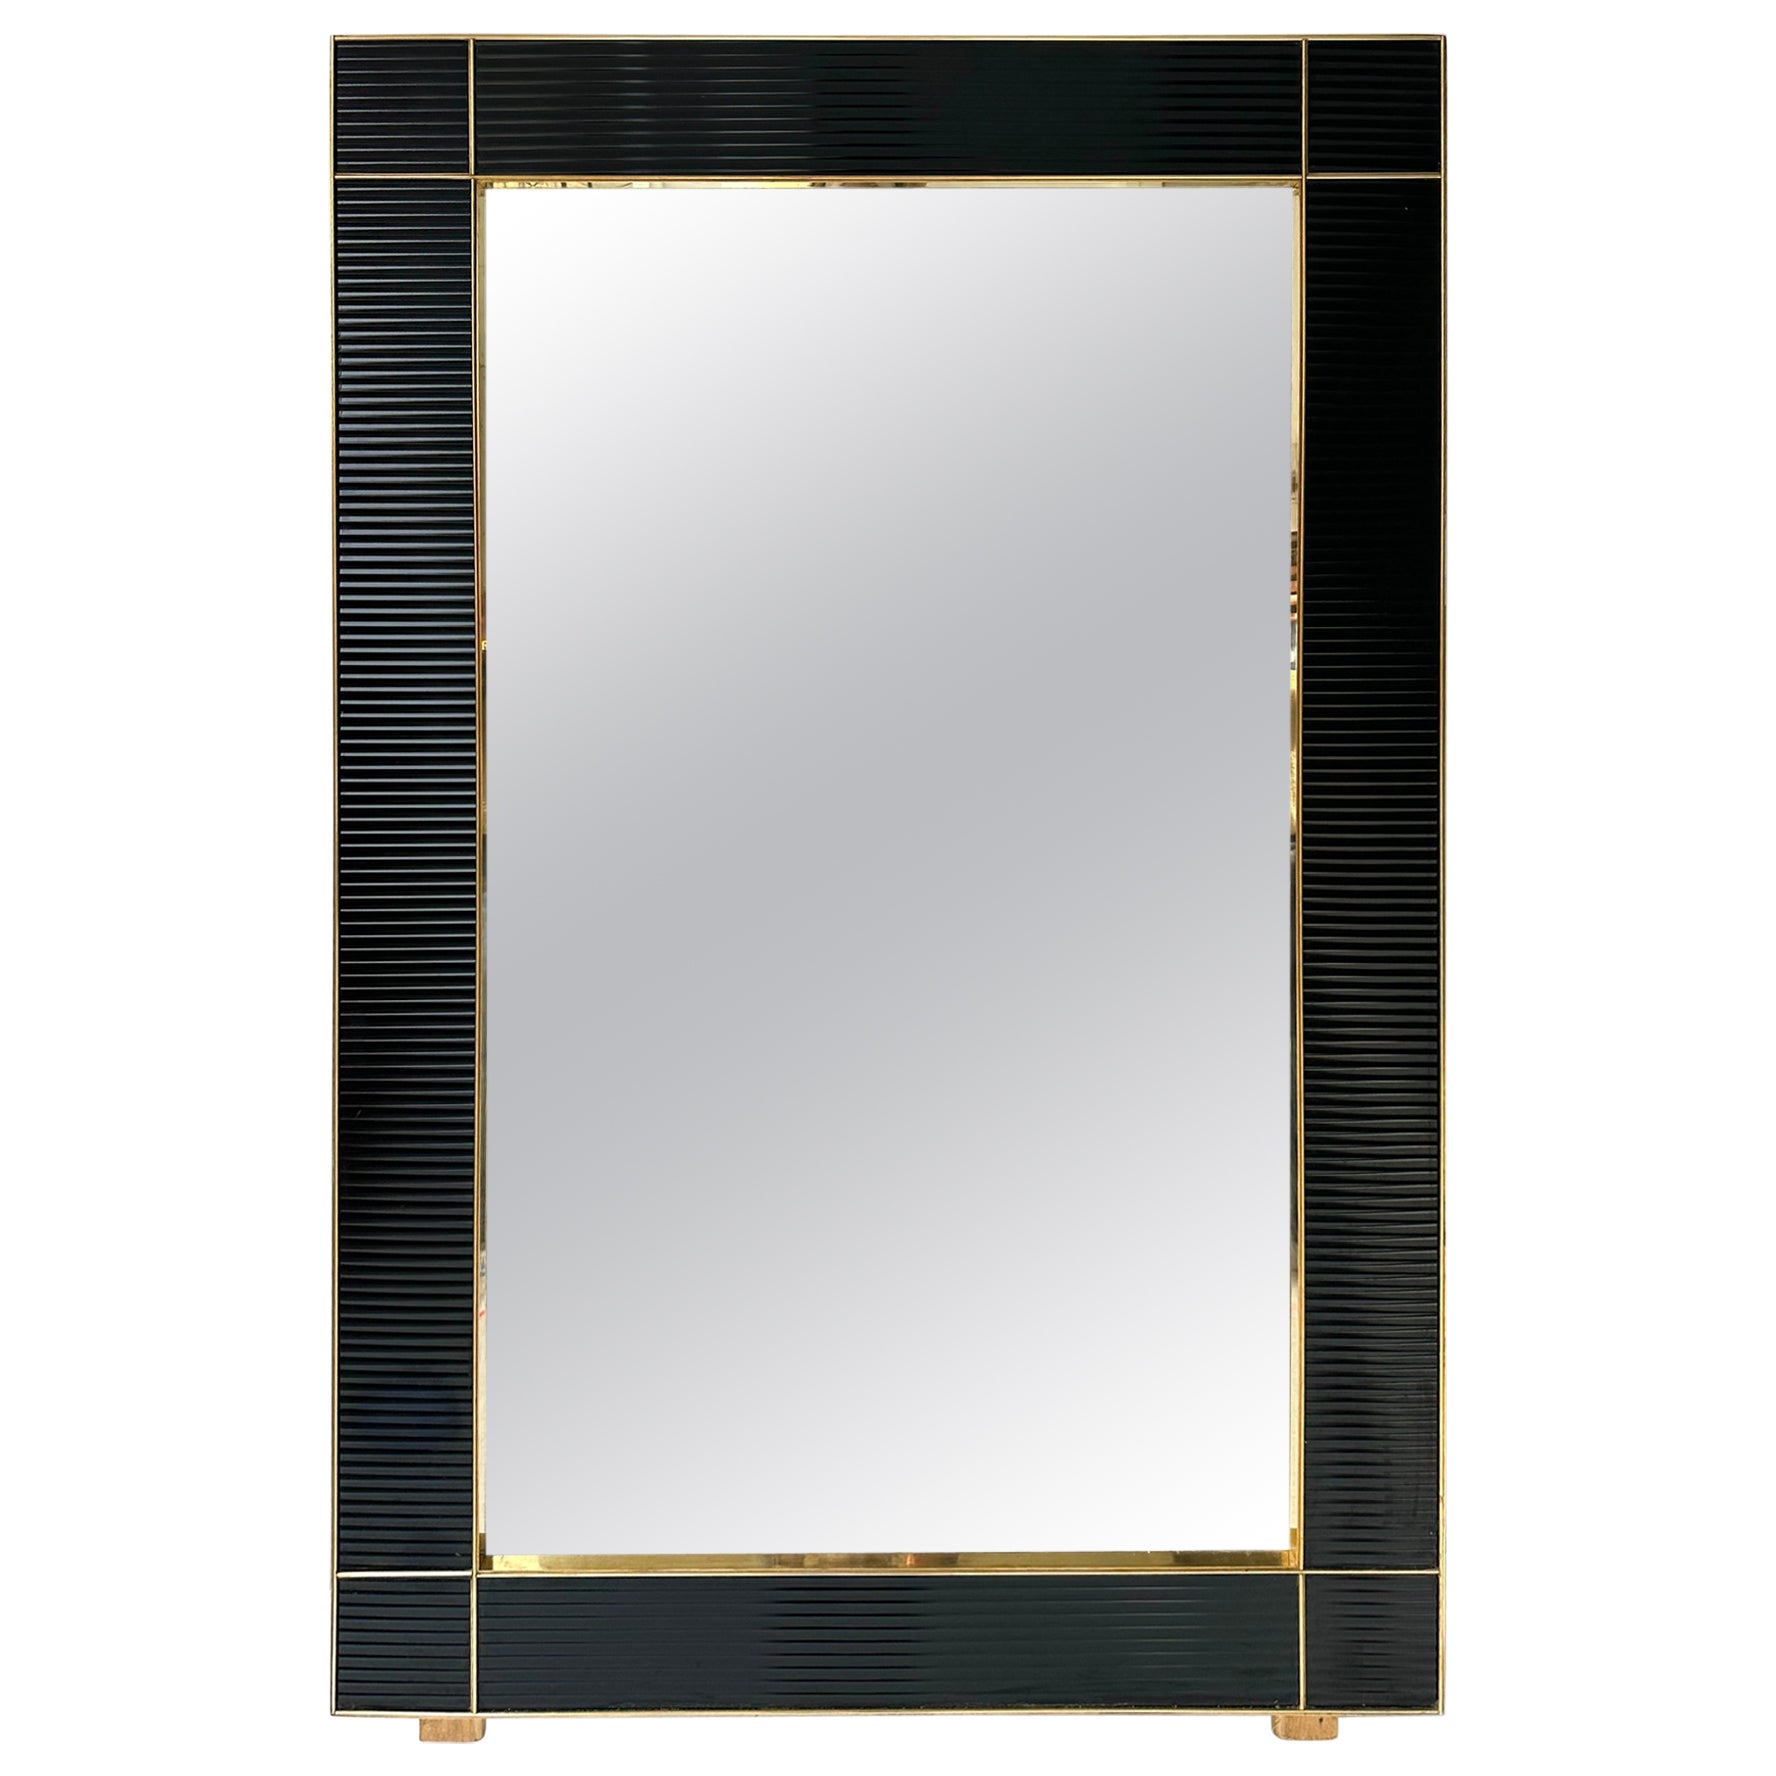 Large Contemporary Brass and Black Fluted Murano Glass  Mirror, Italy